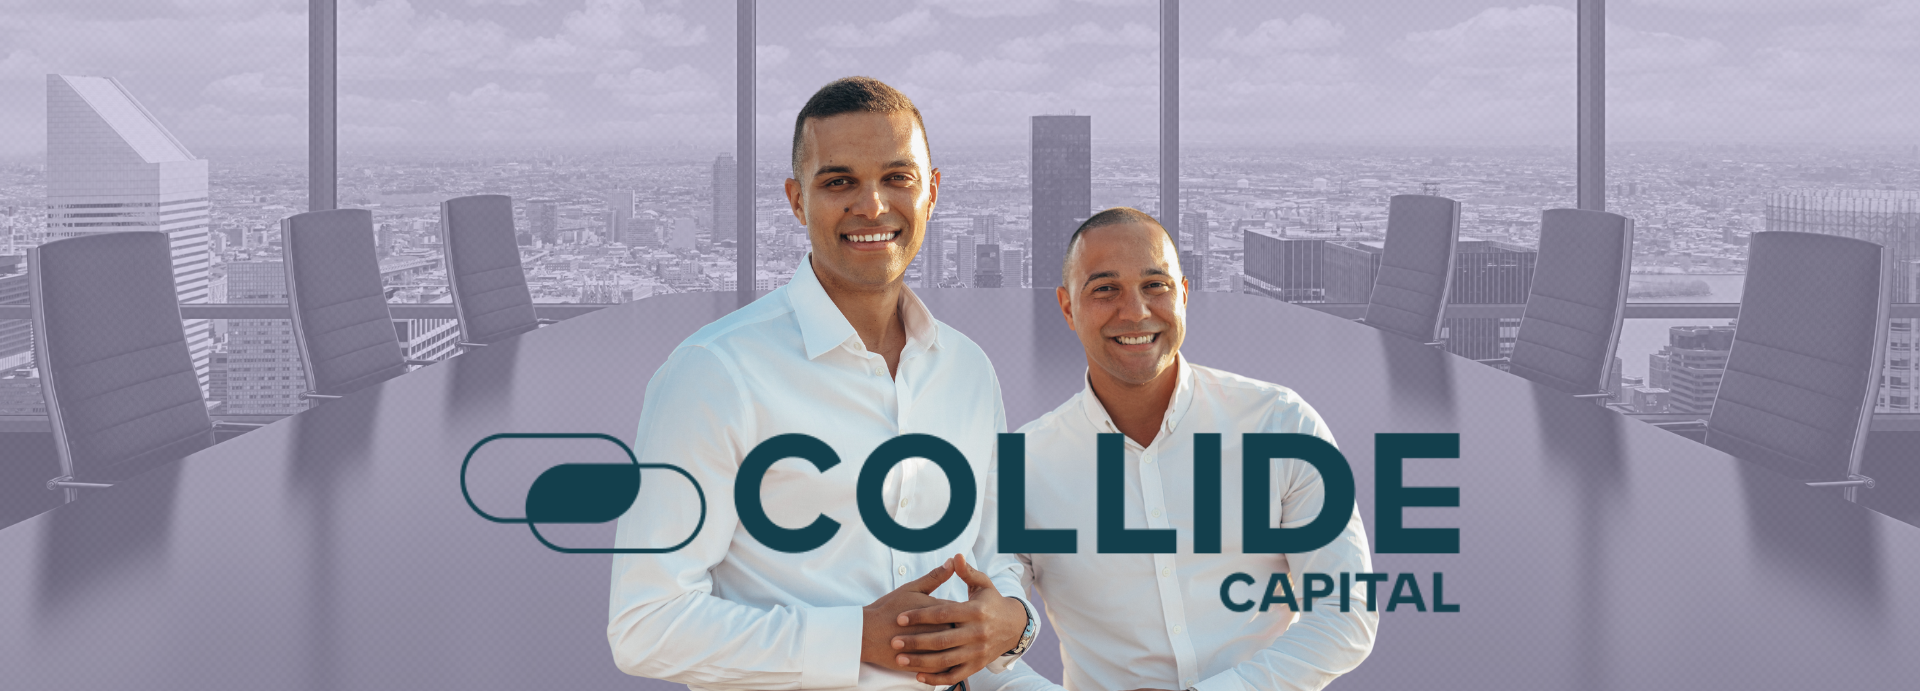 Collide Capital Believes Intersectionality Is Key For Success